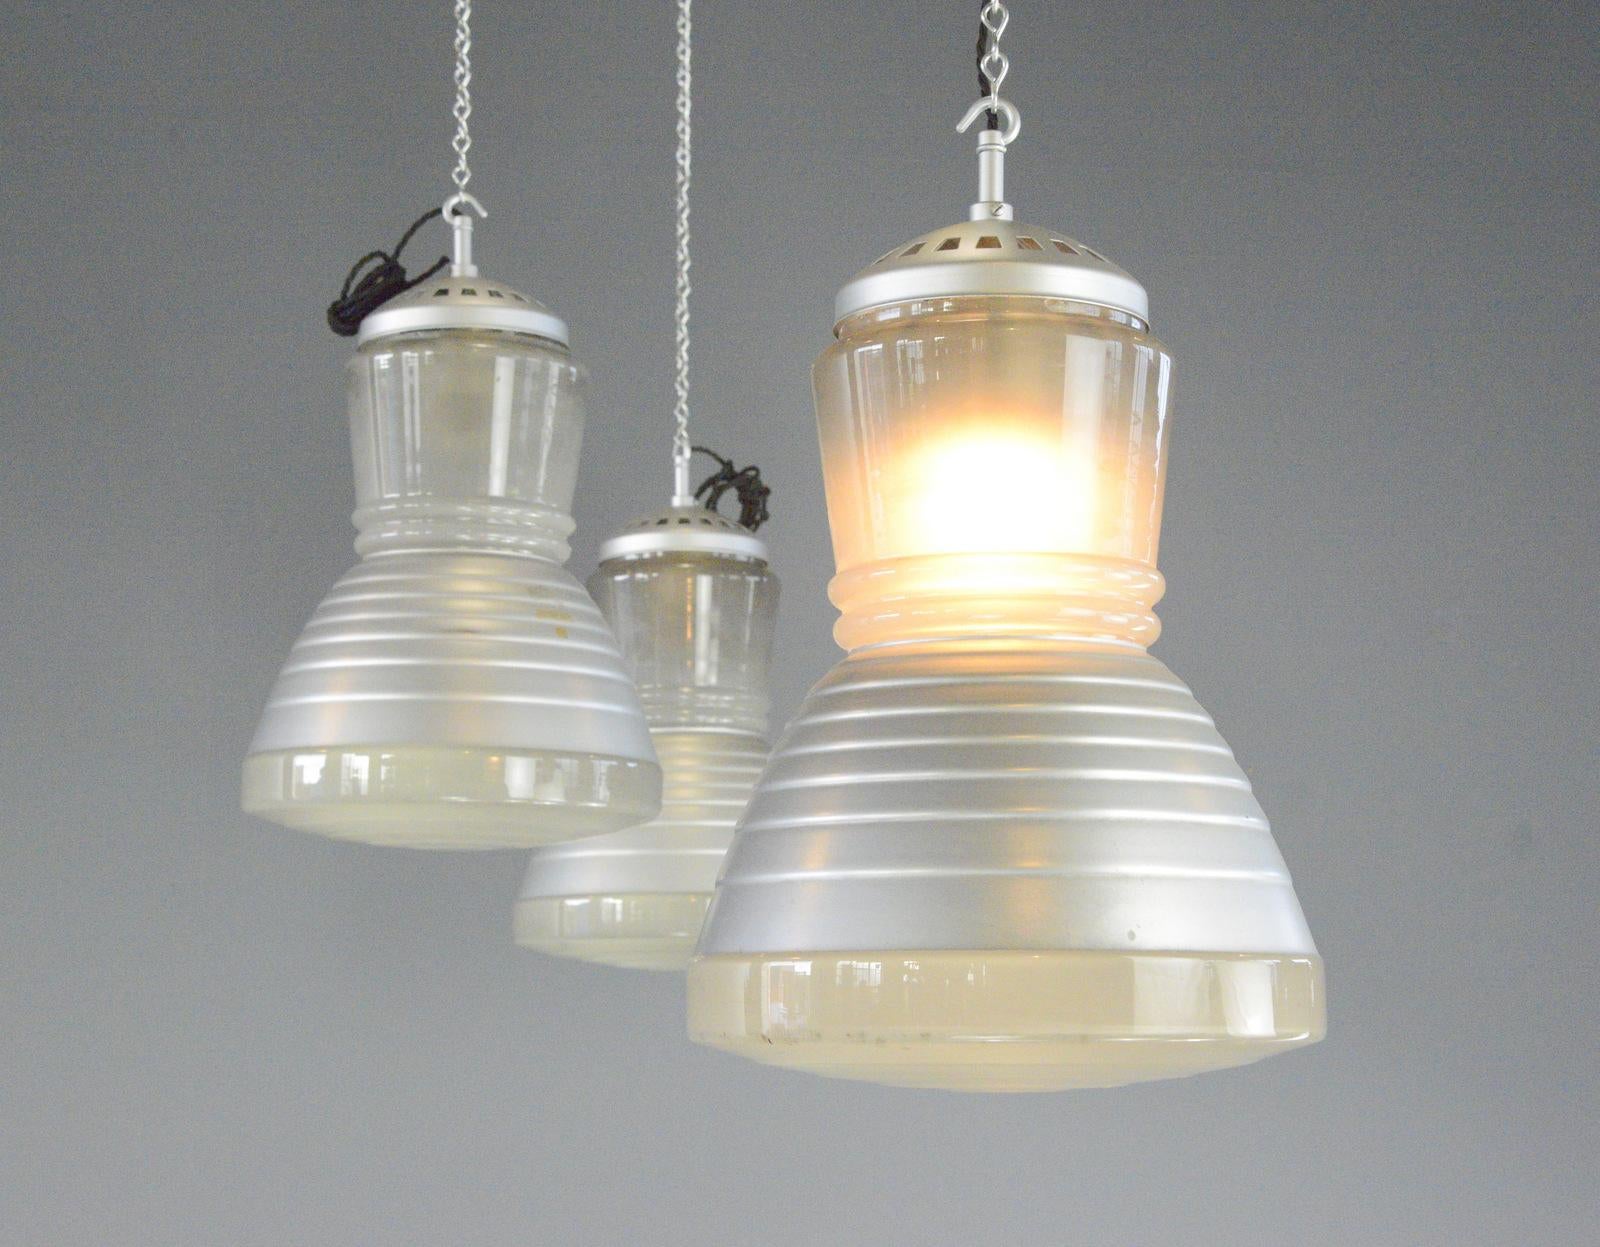 Mid-20th Century Pendant Lights By Adolf Meyer For Zeiss Ikon Circa 1930s For Sale